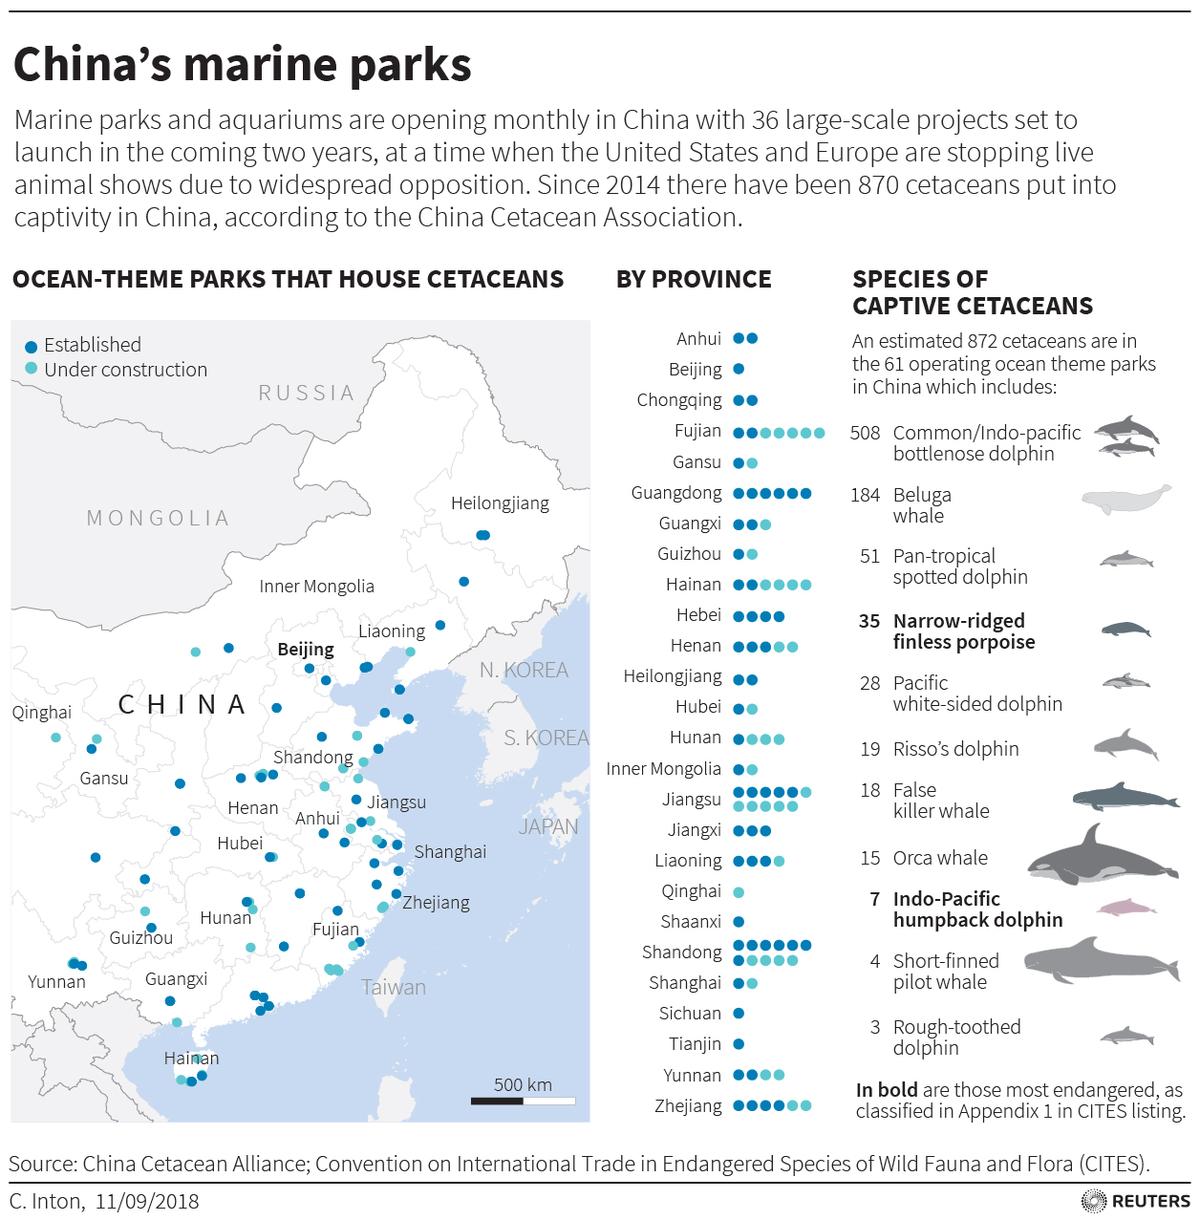 China's ocean theme parks are opening monthly with 36 large-scale projects set to launch in the coming two years, at a time when the United States and Europe are stopping live animal shows due to widespread opposition. (By China Cetacean Alliance/CITES/Reuters)